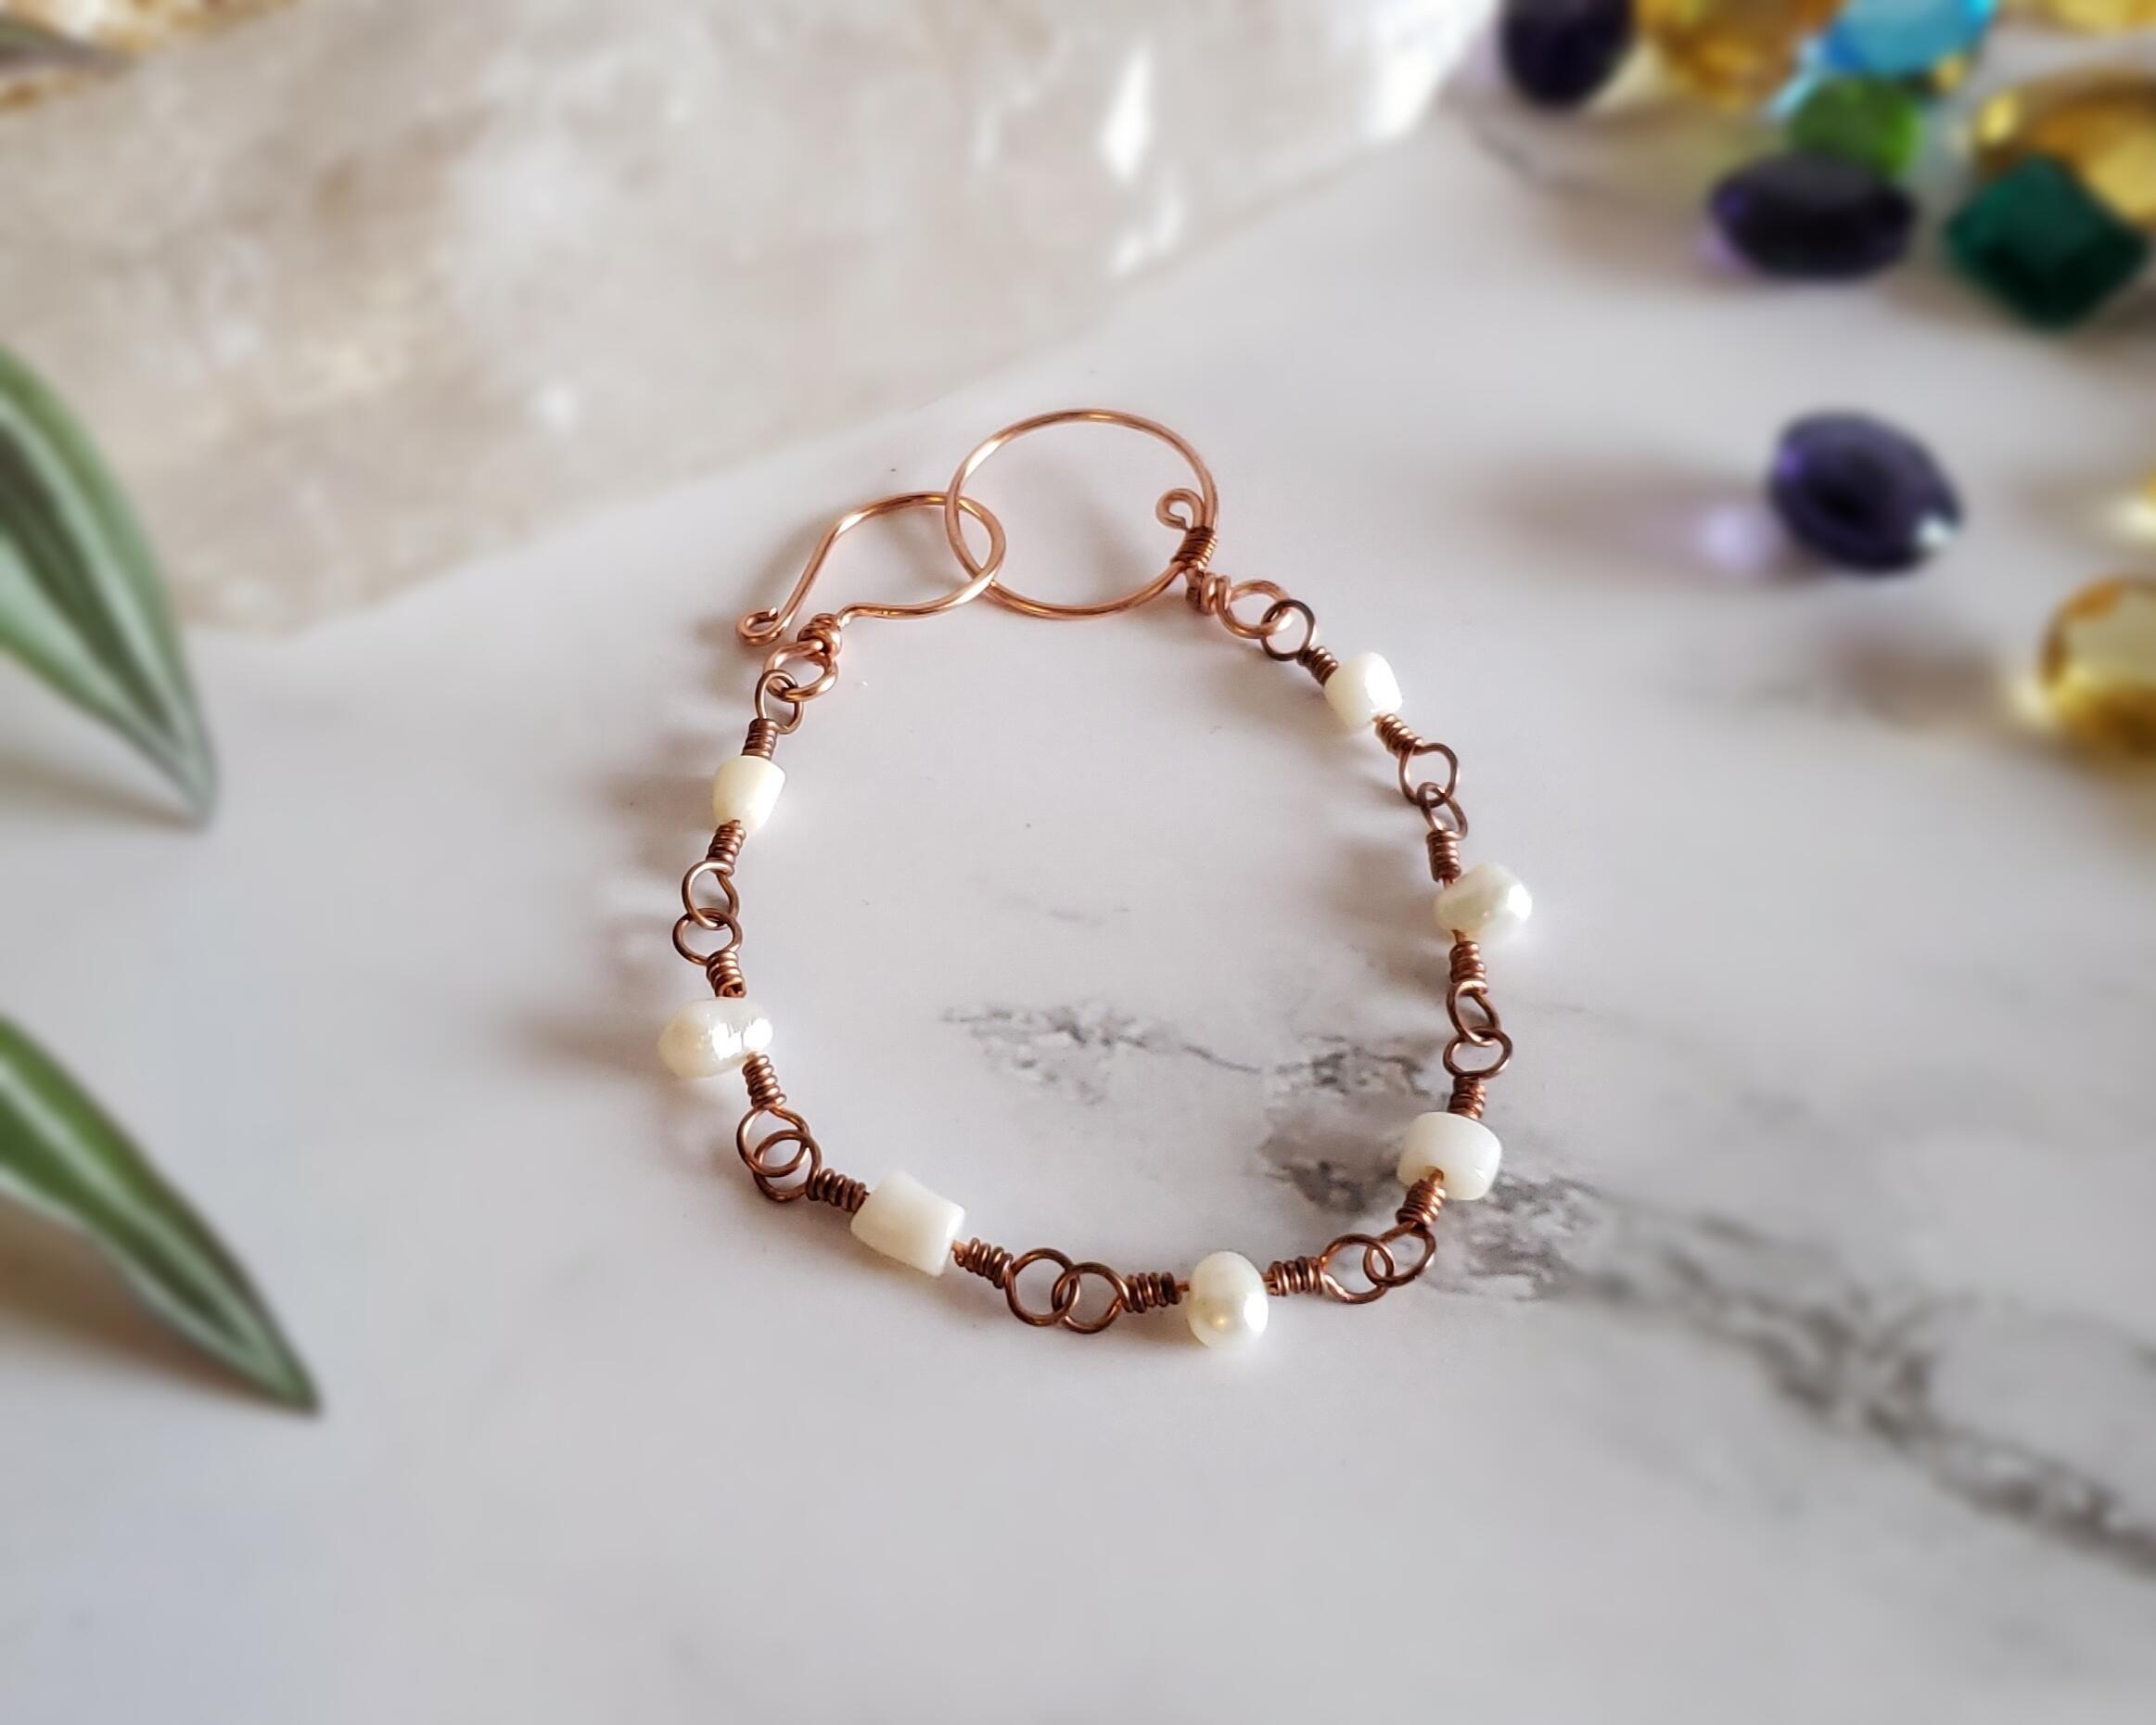 Coral, Pearl and Copper Bracelet